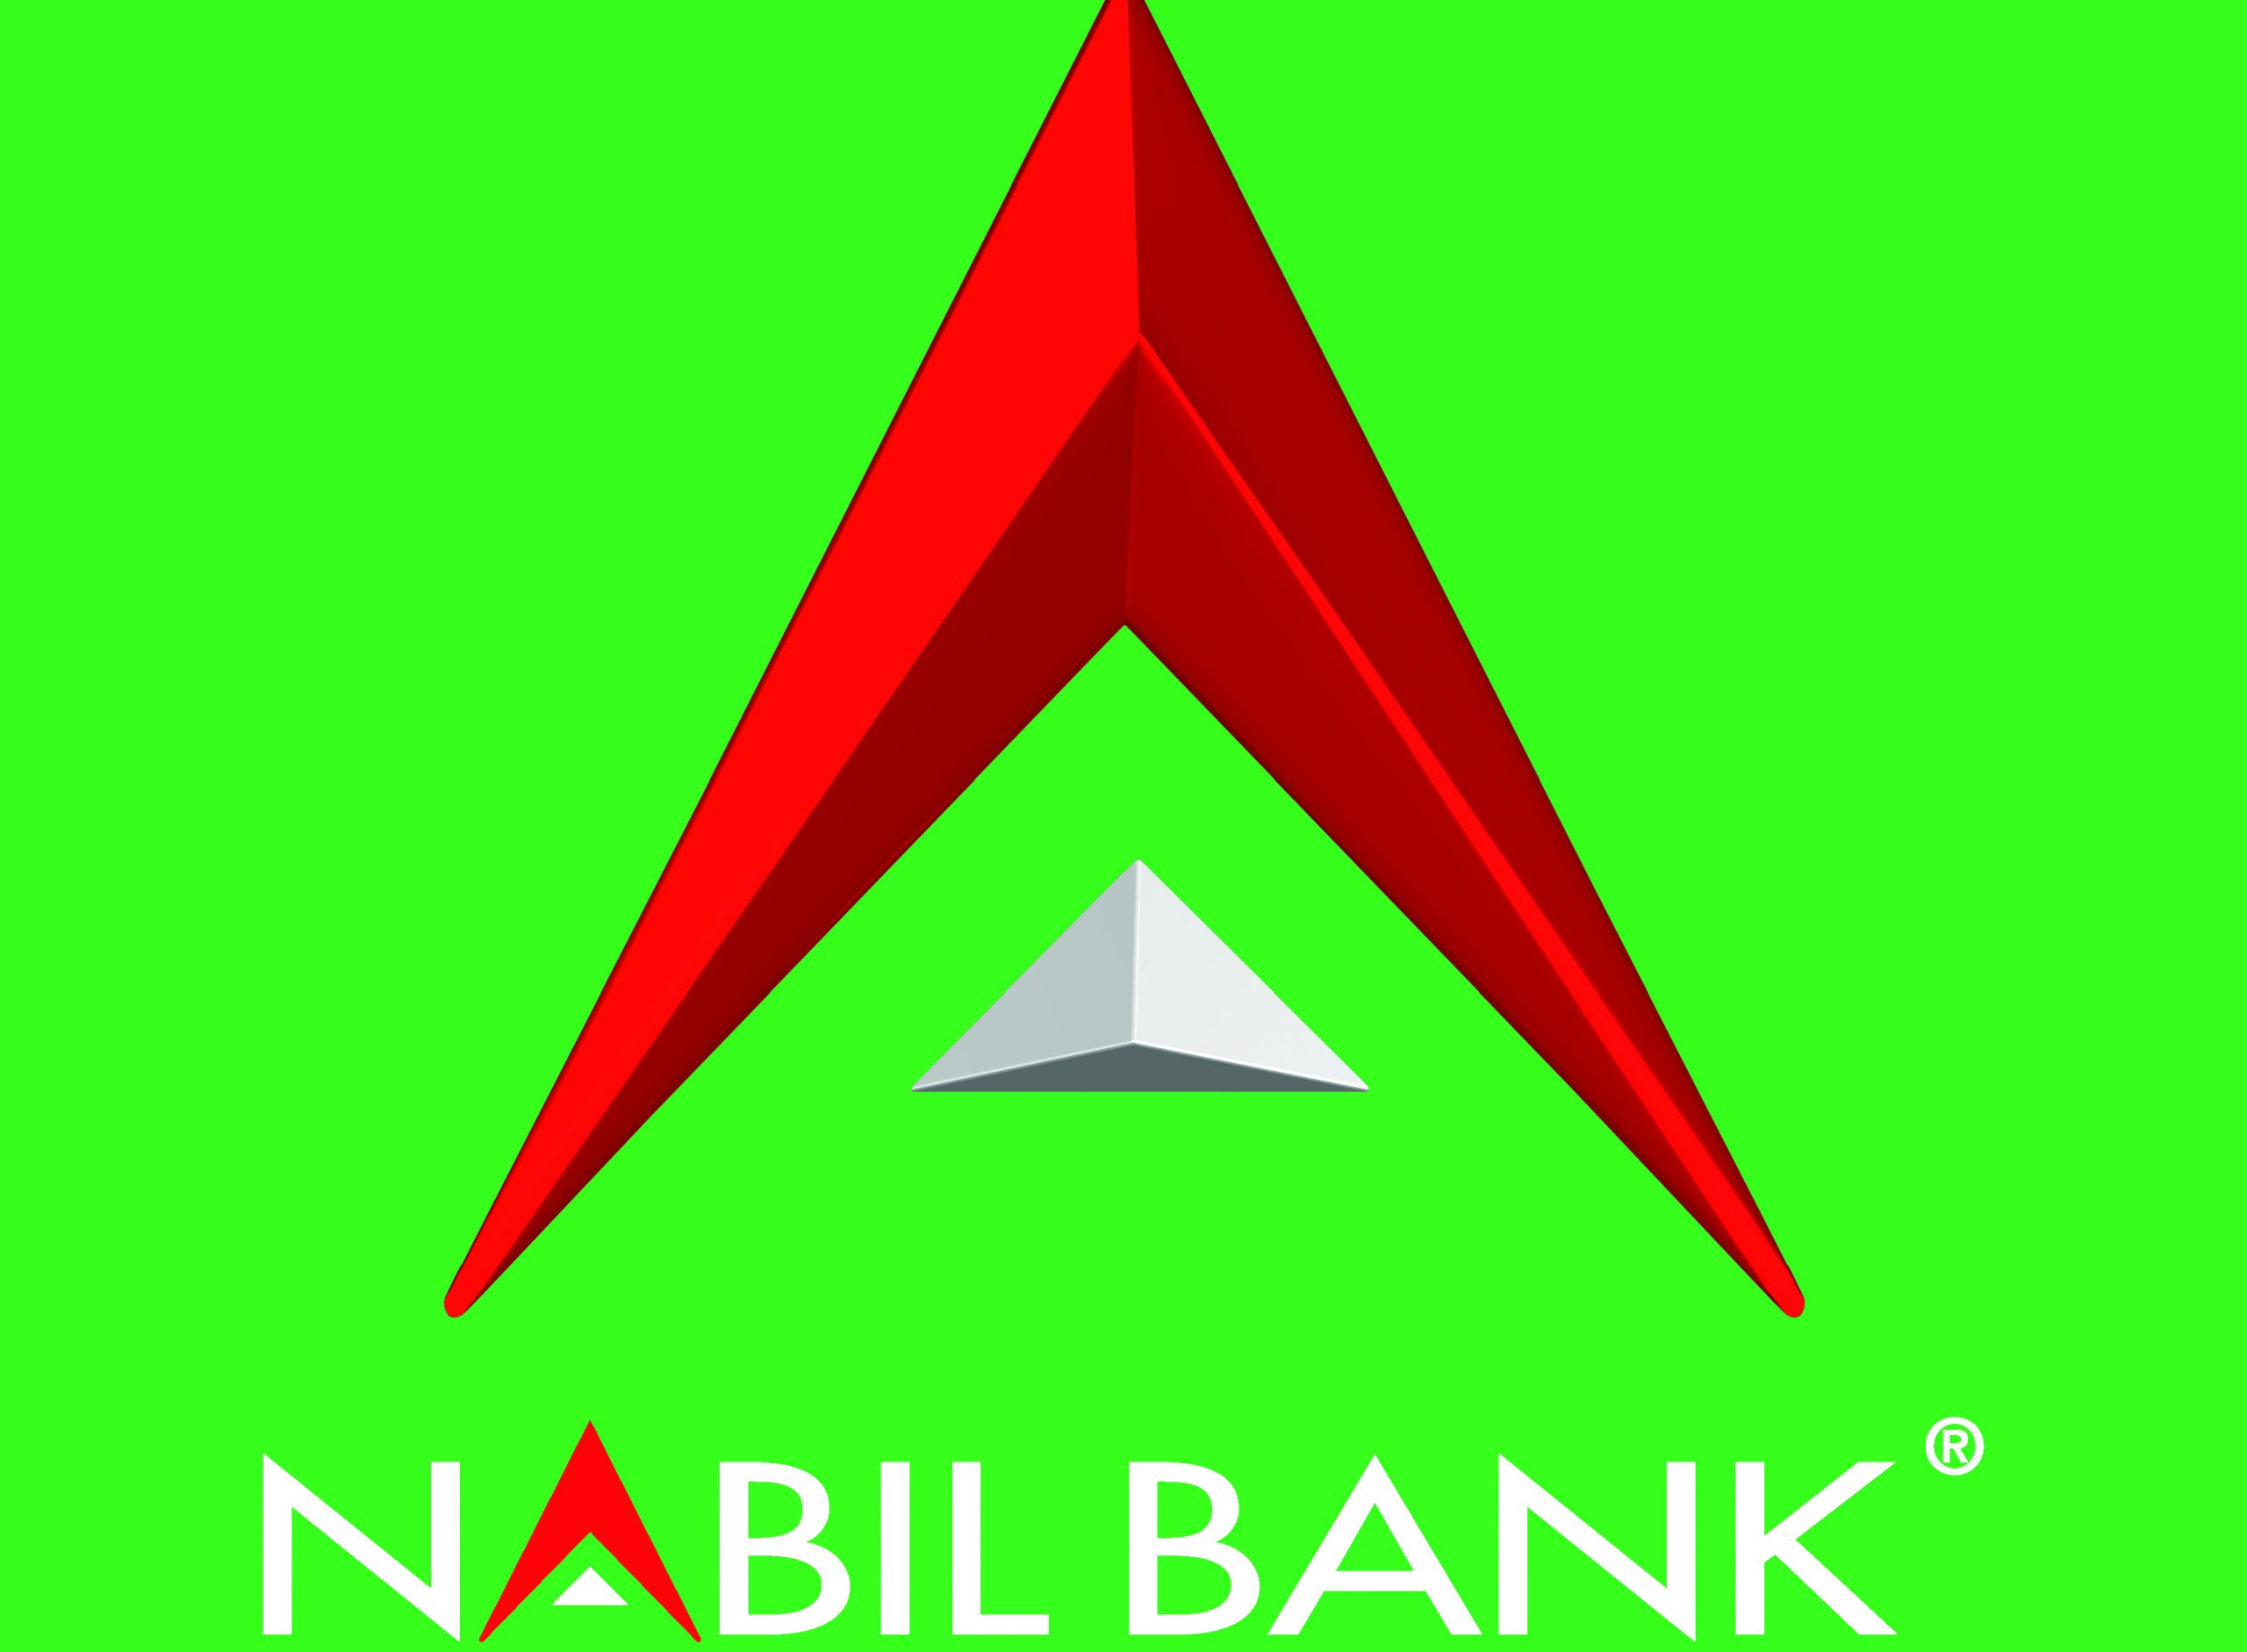 Nabil Bank’s highest Rs. Buy and sell shares worth Rs. 43.1 million